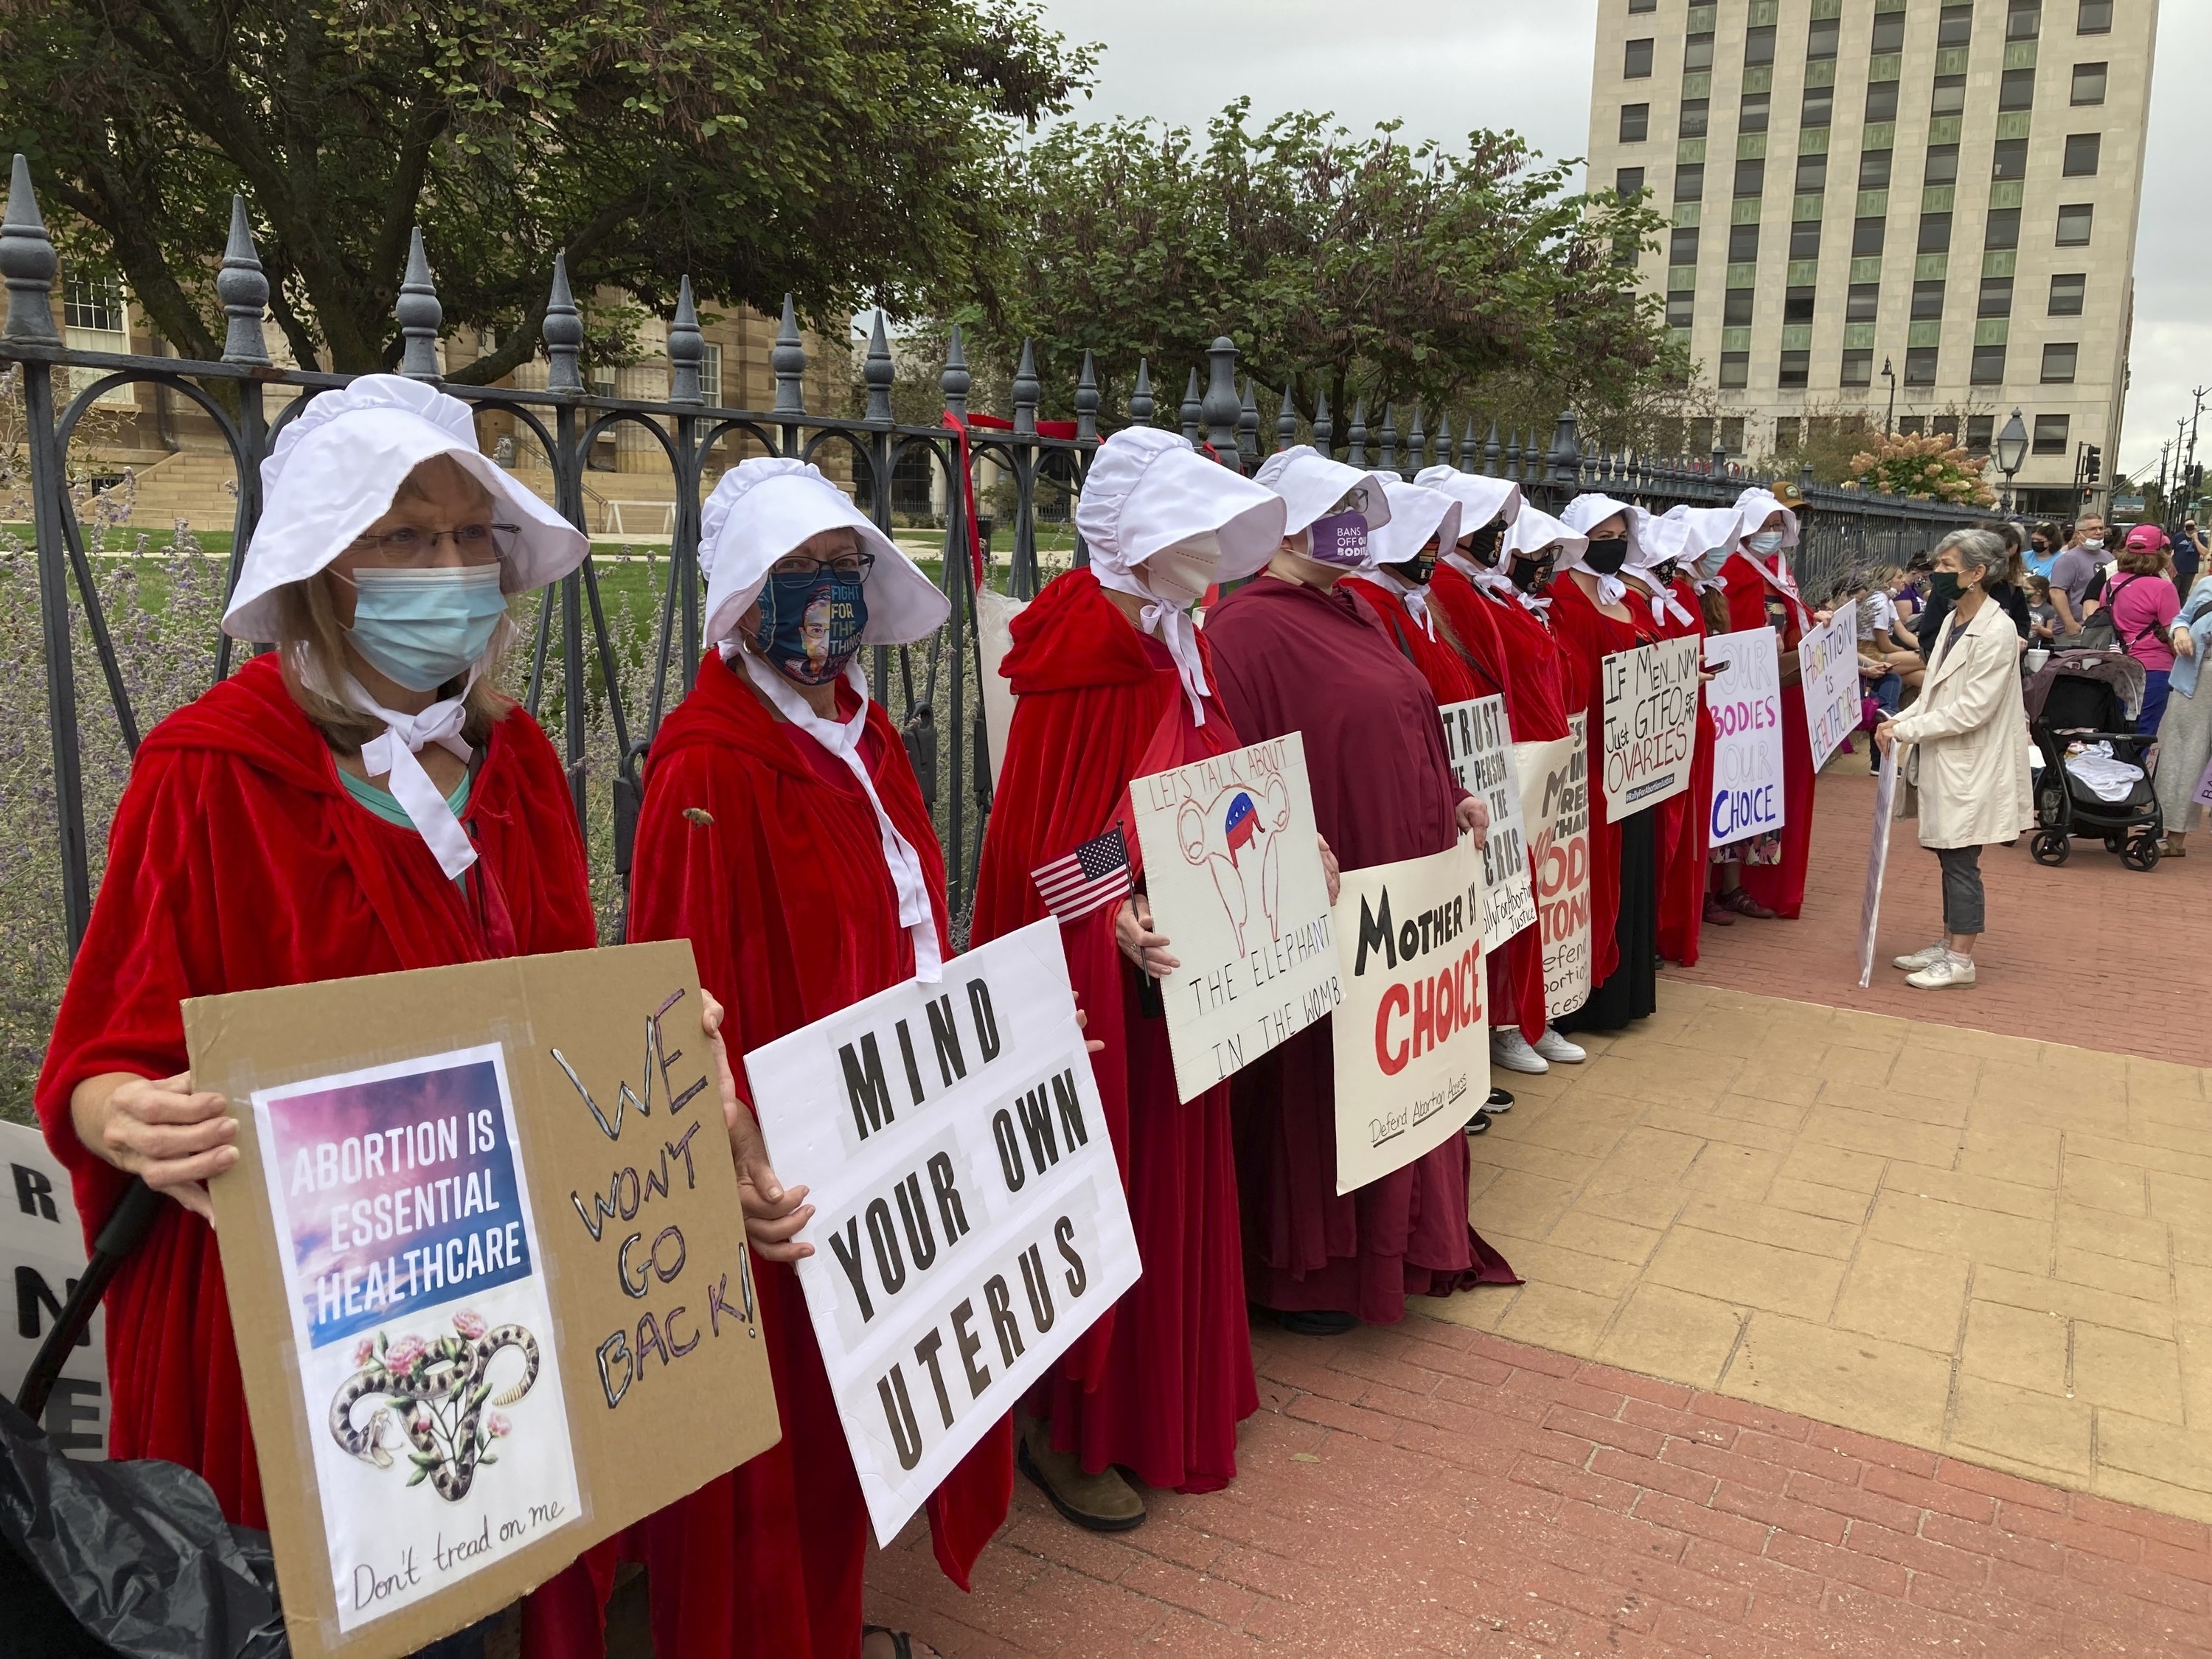 People standing by a gate and dressed as Handmaids from &quot;The Handmaids Tale&quot; hold up signs, including &quot;Mind Your Own Uterus&quot;